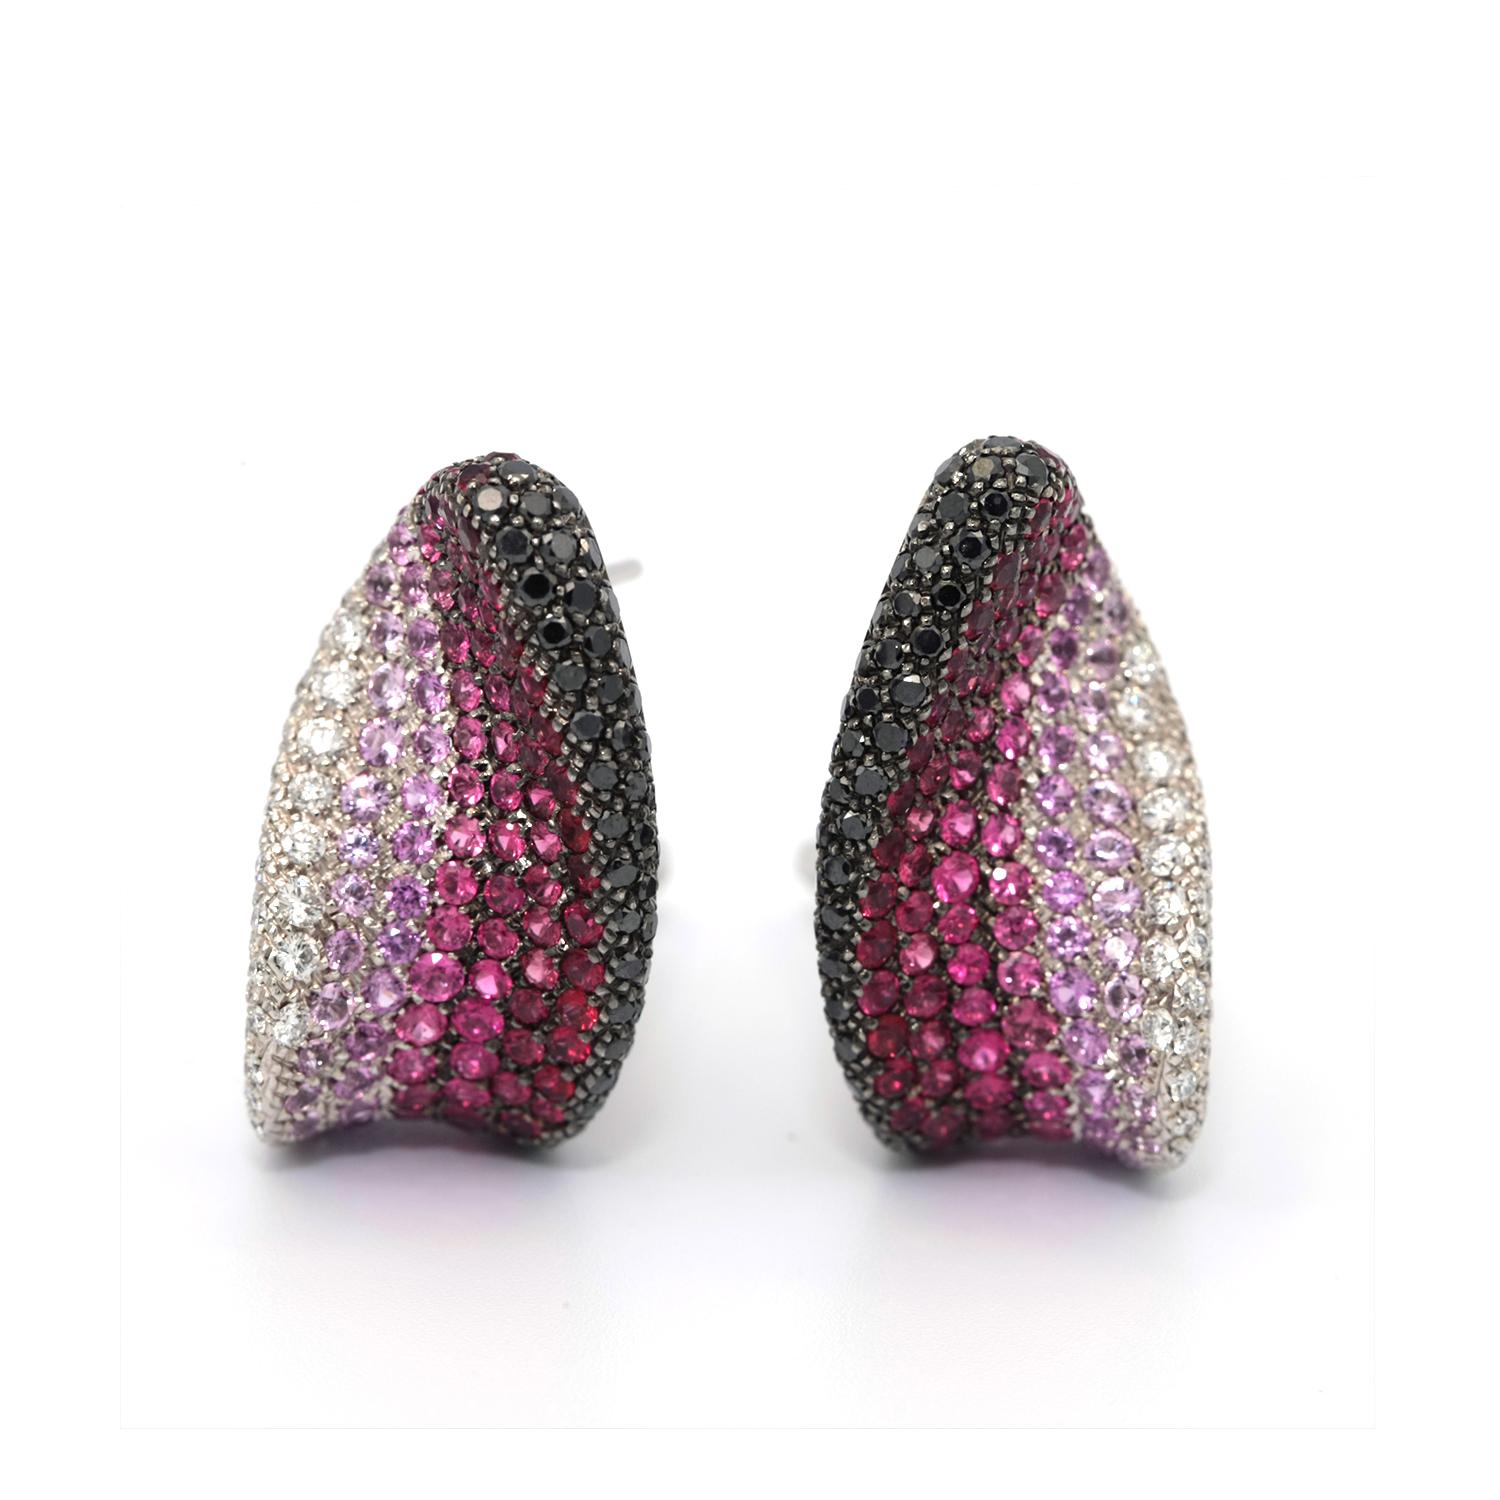 These earrings features river flow motif are paved with full-cut white diamonds and black diamonds, along with red rubies and pink sapphires.
White 18k Gold 
Weight: 20.68 Grams
White Diamonds Total weight: 0.98 cts
Black Diamonds Total weight: 1.22